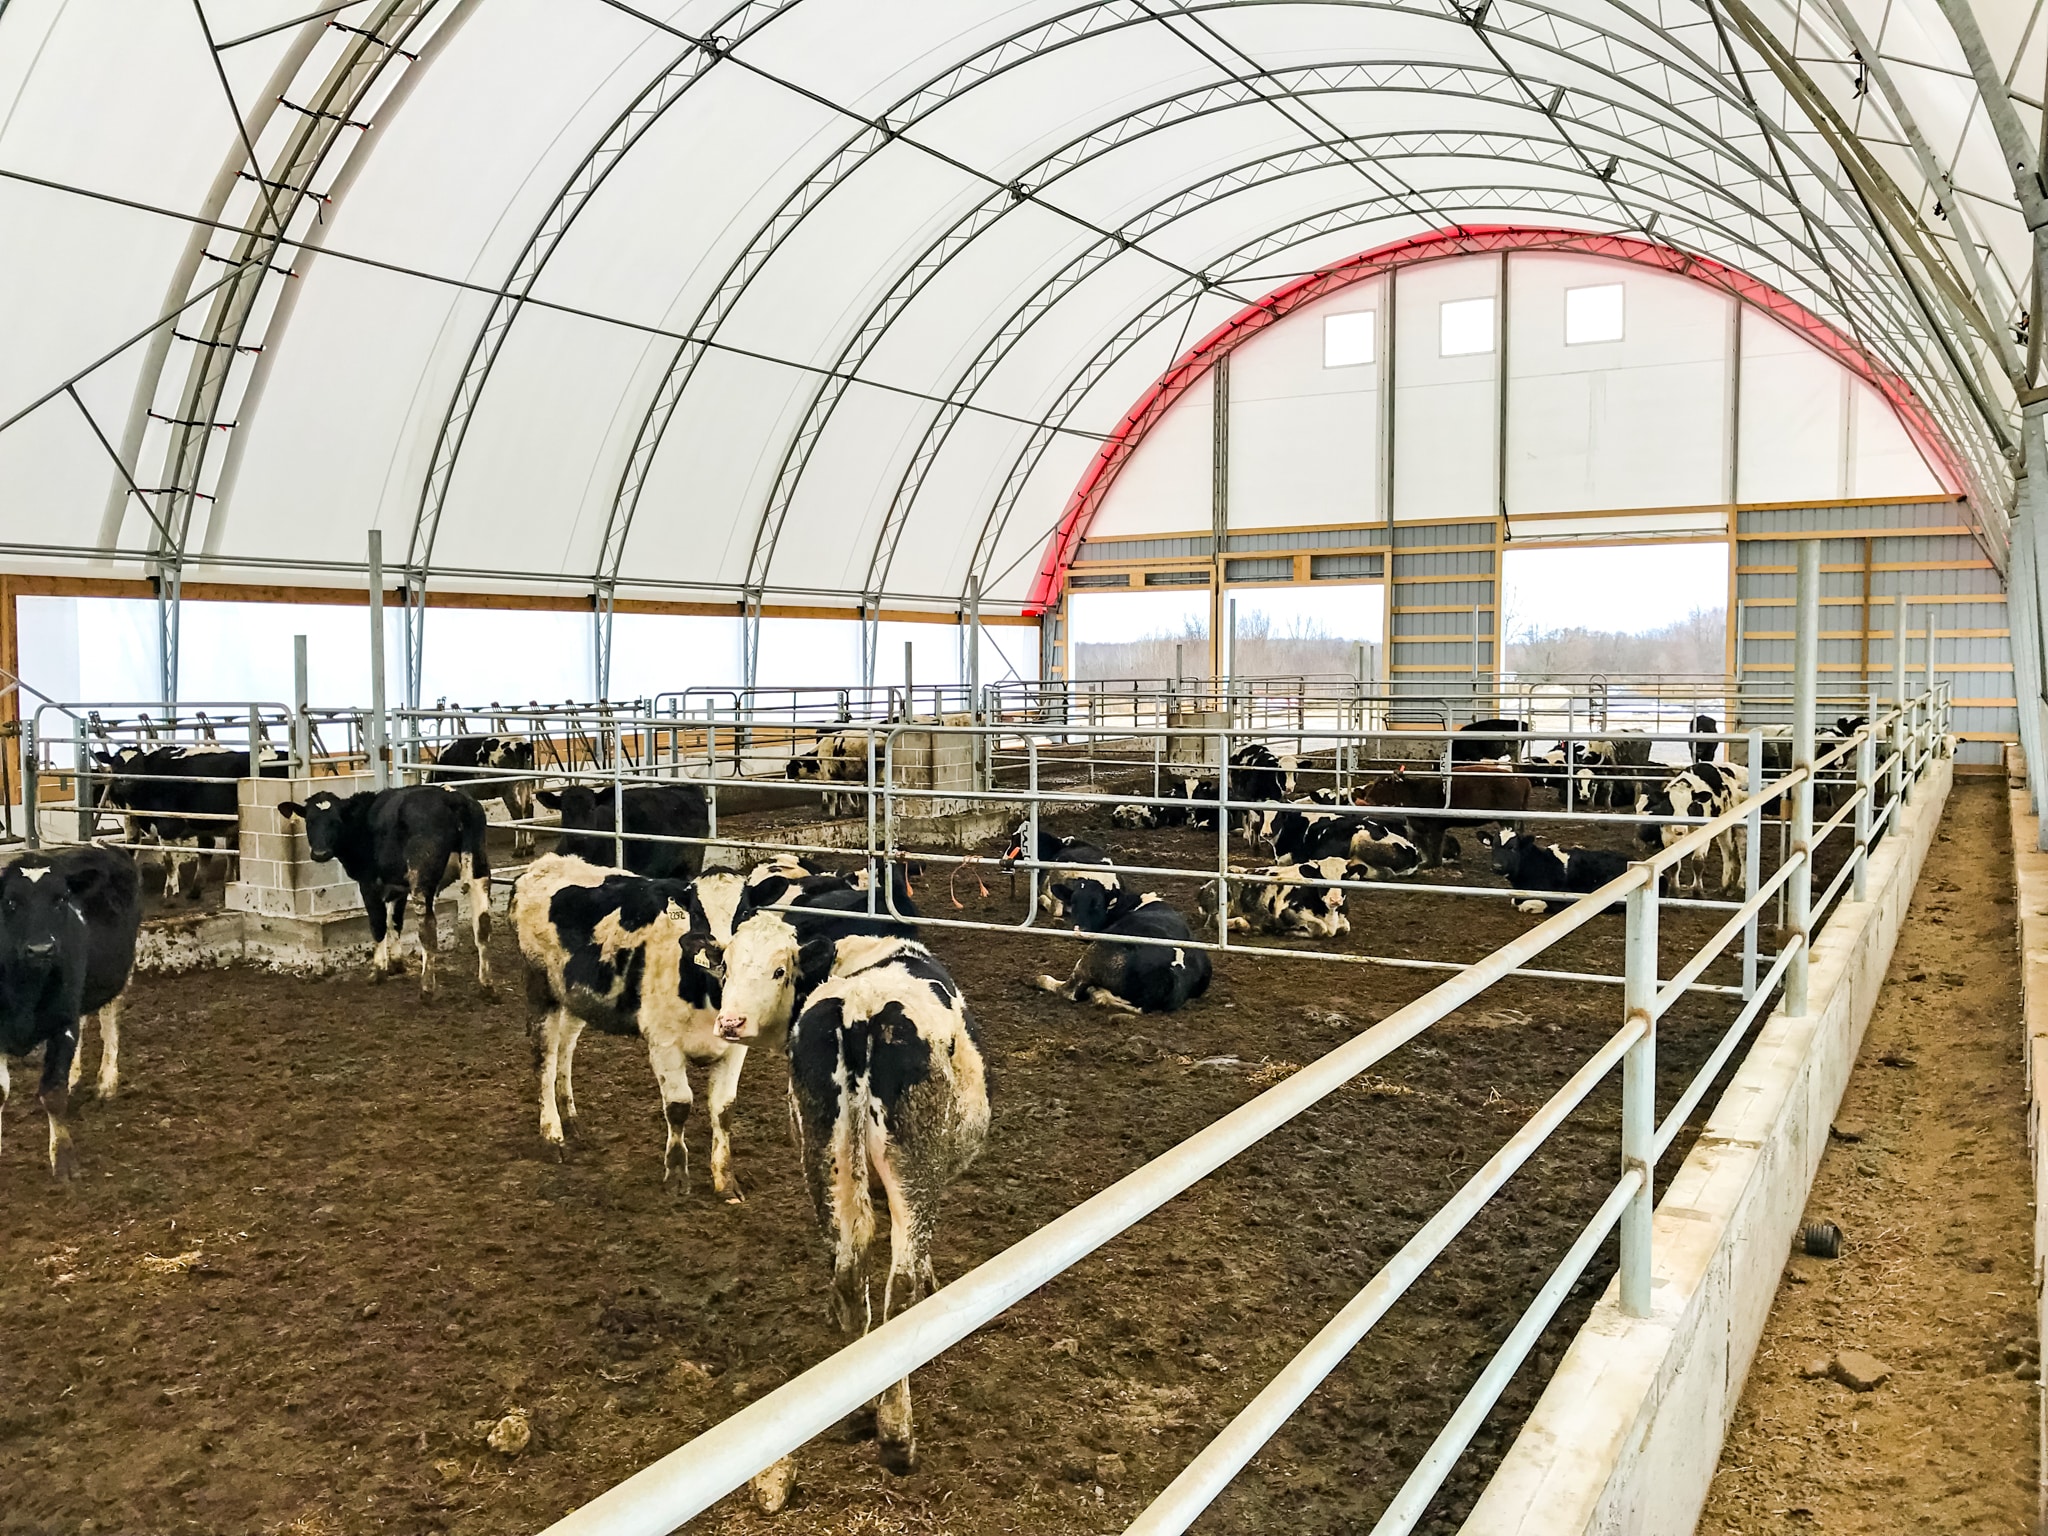 low maintenance cost-effective breathable nature tension fabric buildings makes excellent farmers